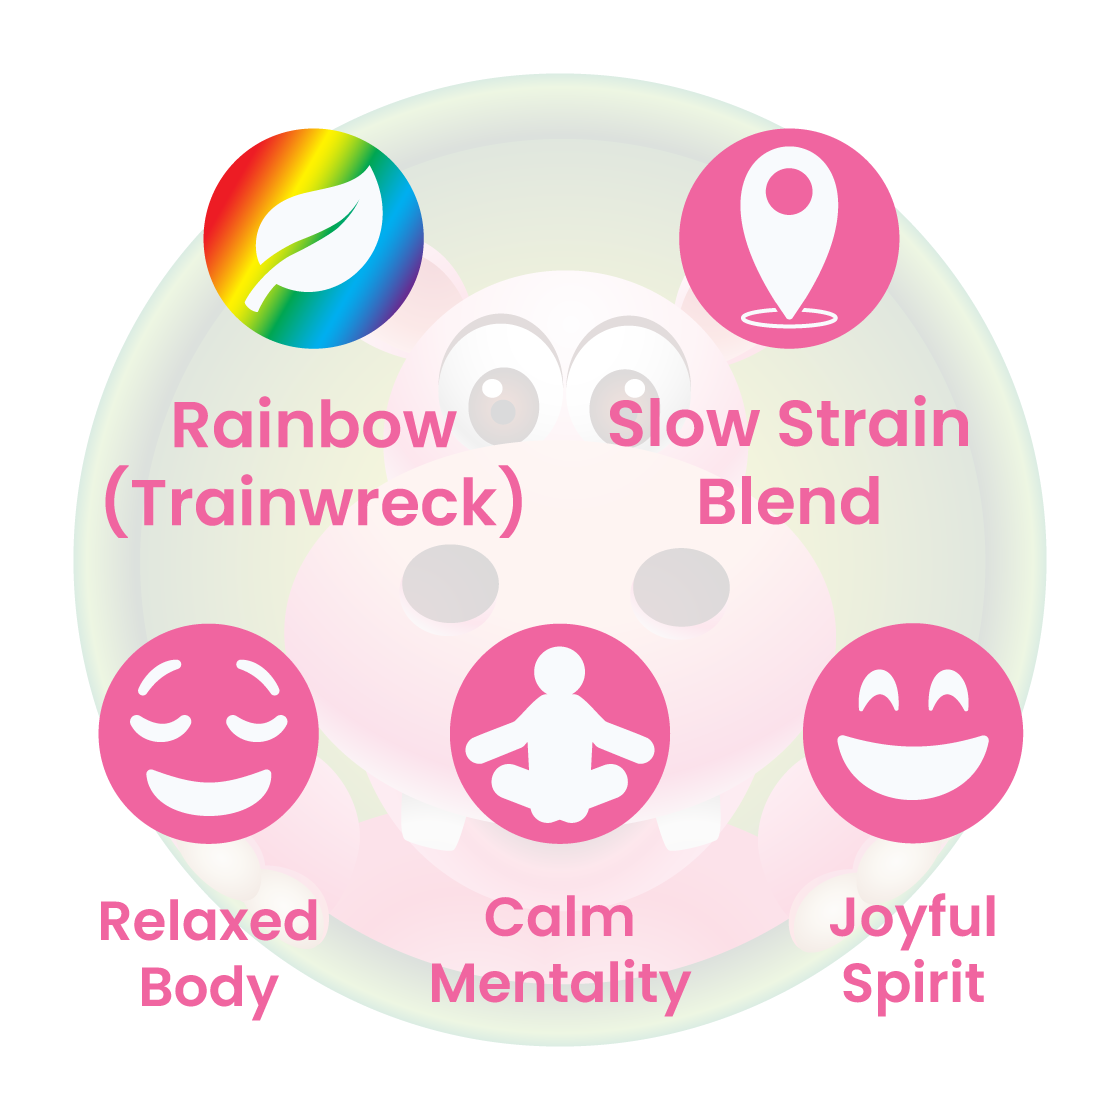 Infographic Details for Happy Hippo Blended Trainwreck Kratom Powder (Slow Rainbow). Leaf color: Rainbow. Kratom Strain Origin: Various. Kratom Effects resonate with a Relaxed Body, Calm Mentality, and Joyful Spirit..